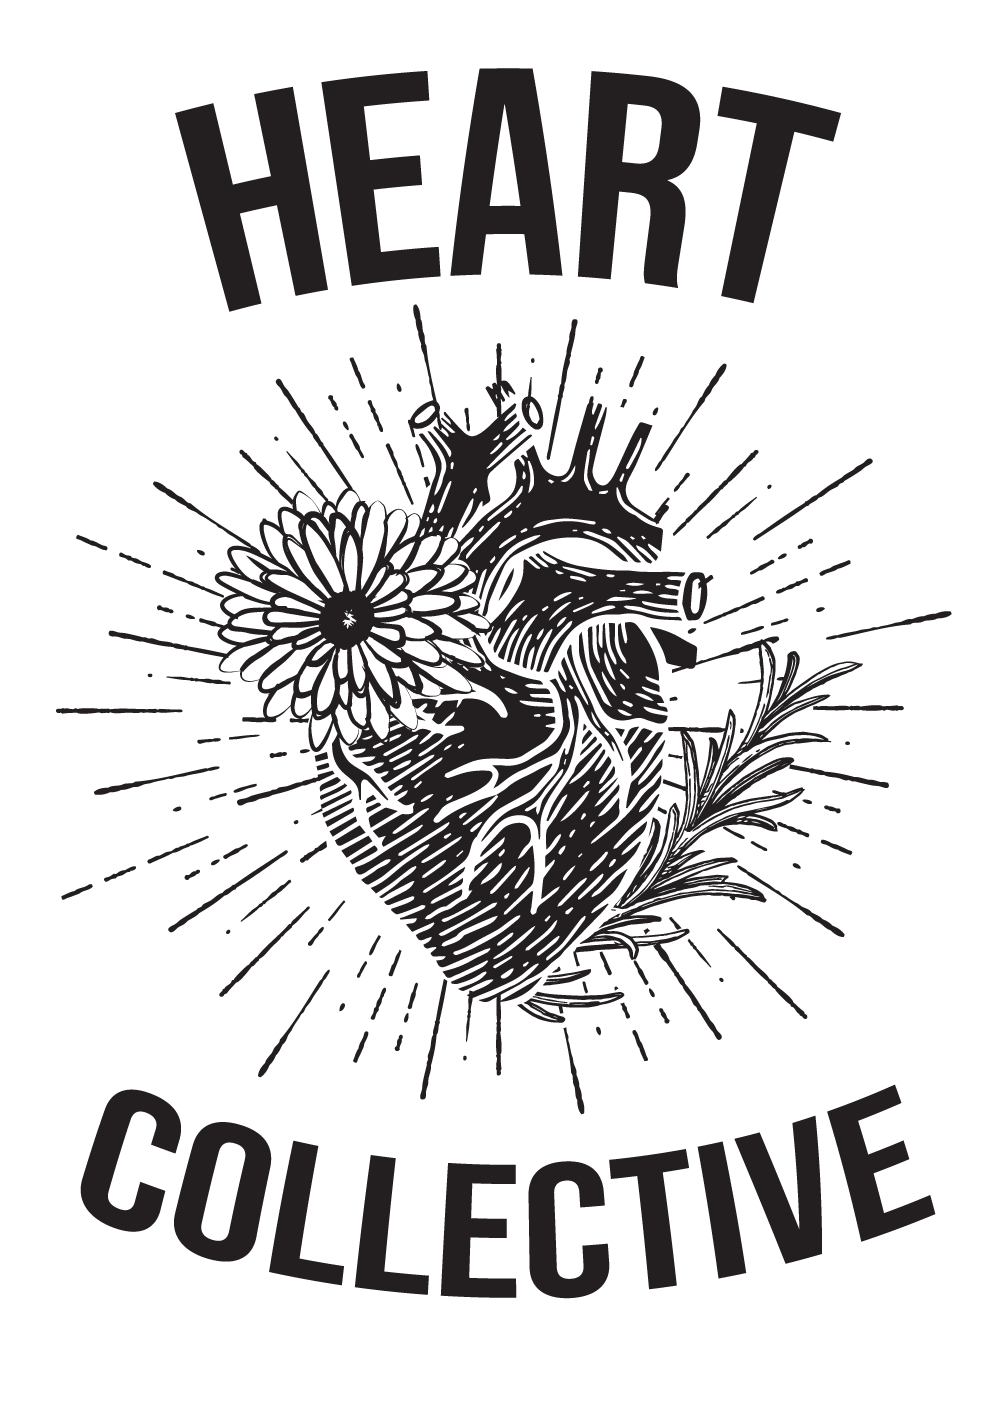 HEART Collective